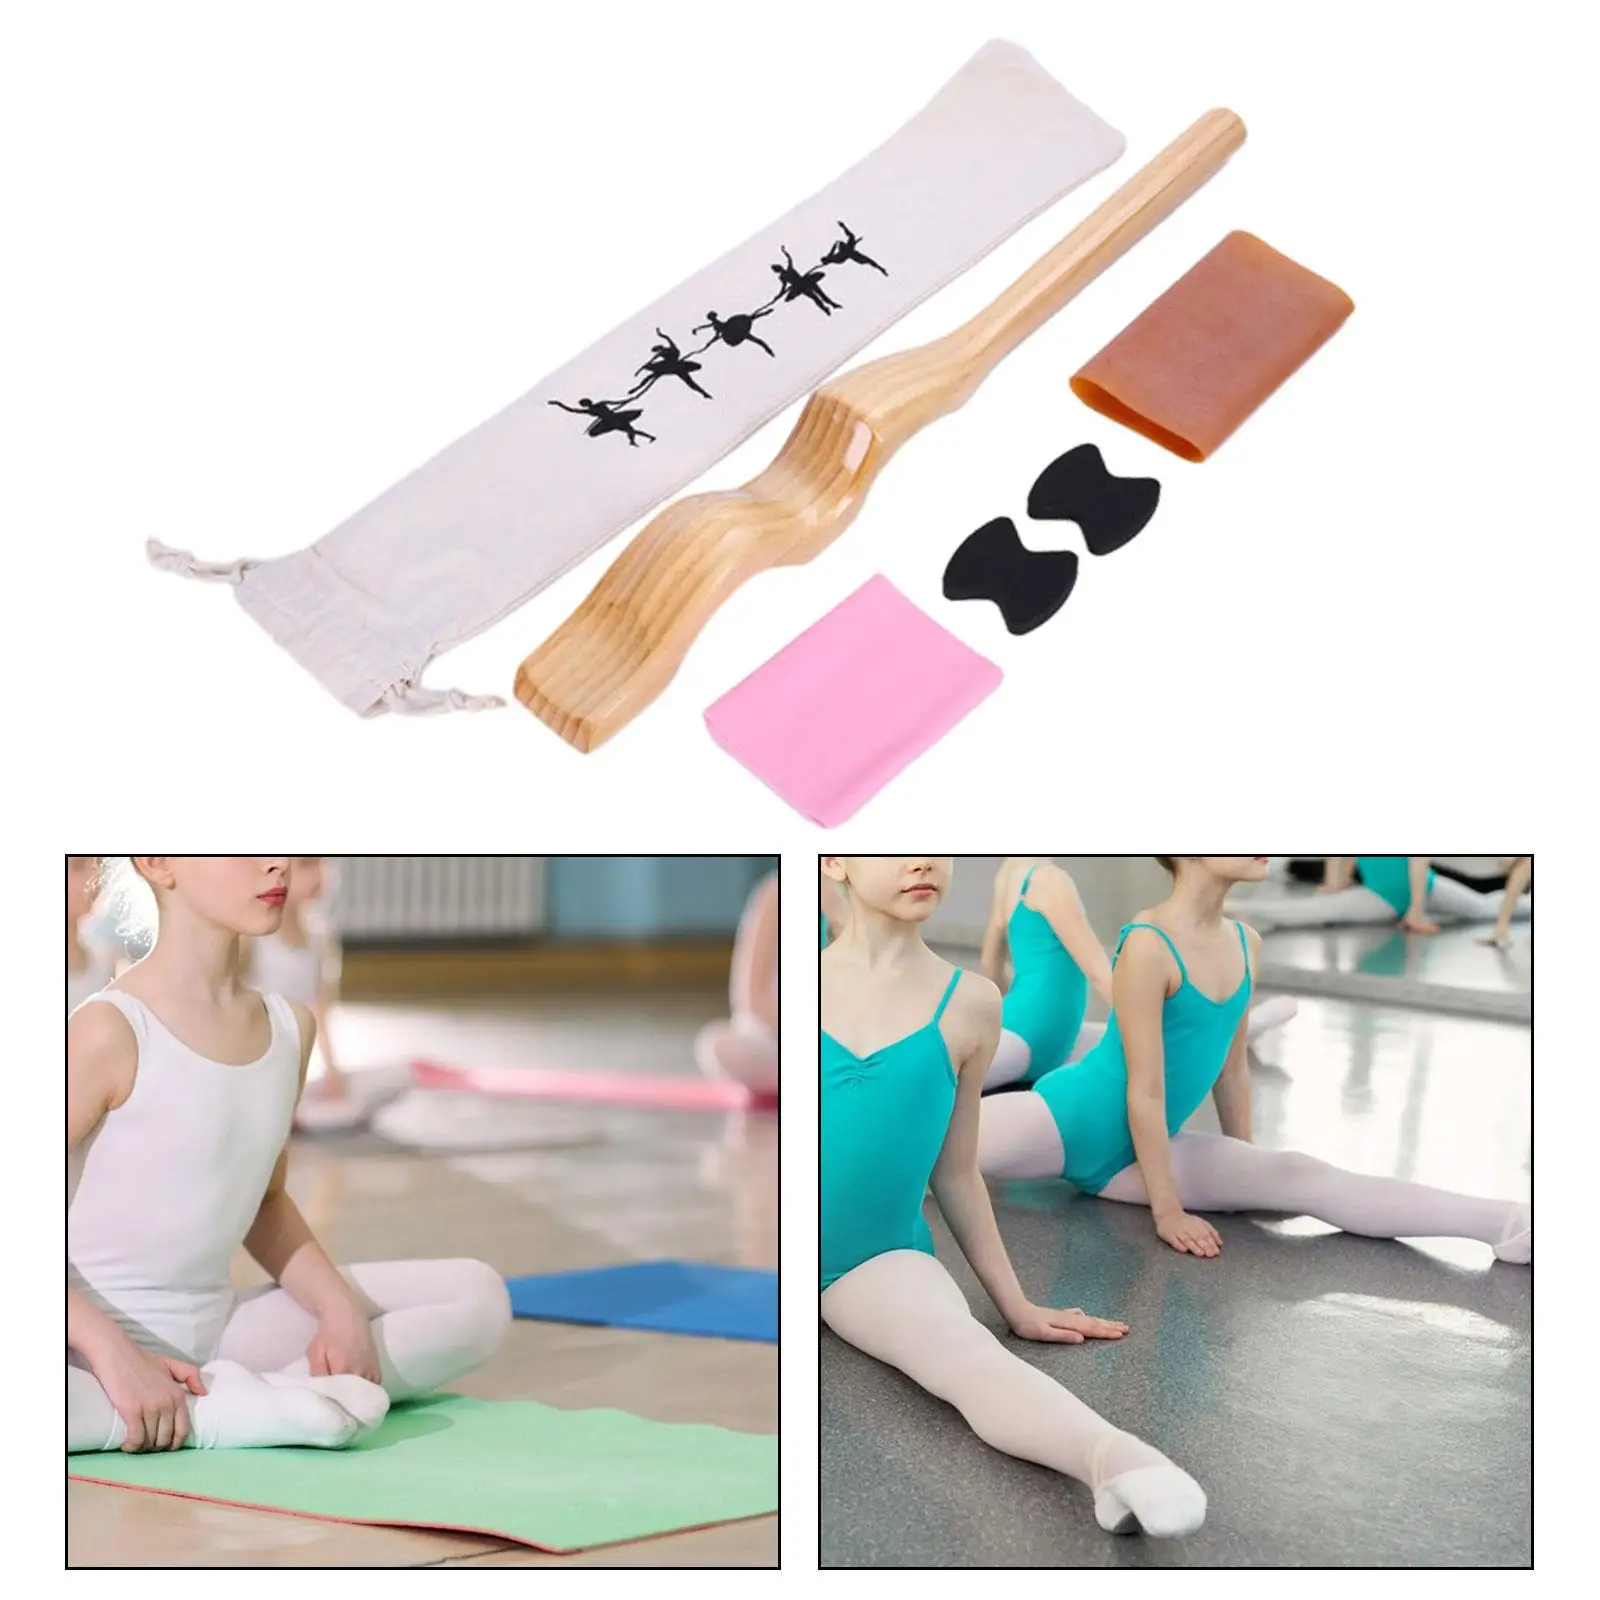 Ballet Dance Foot Stretcher Professional Wood for Adults Kids with Resistance Bands Dance Stretching Equipment for Ballet Dancer